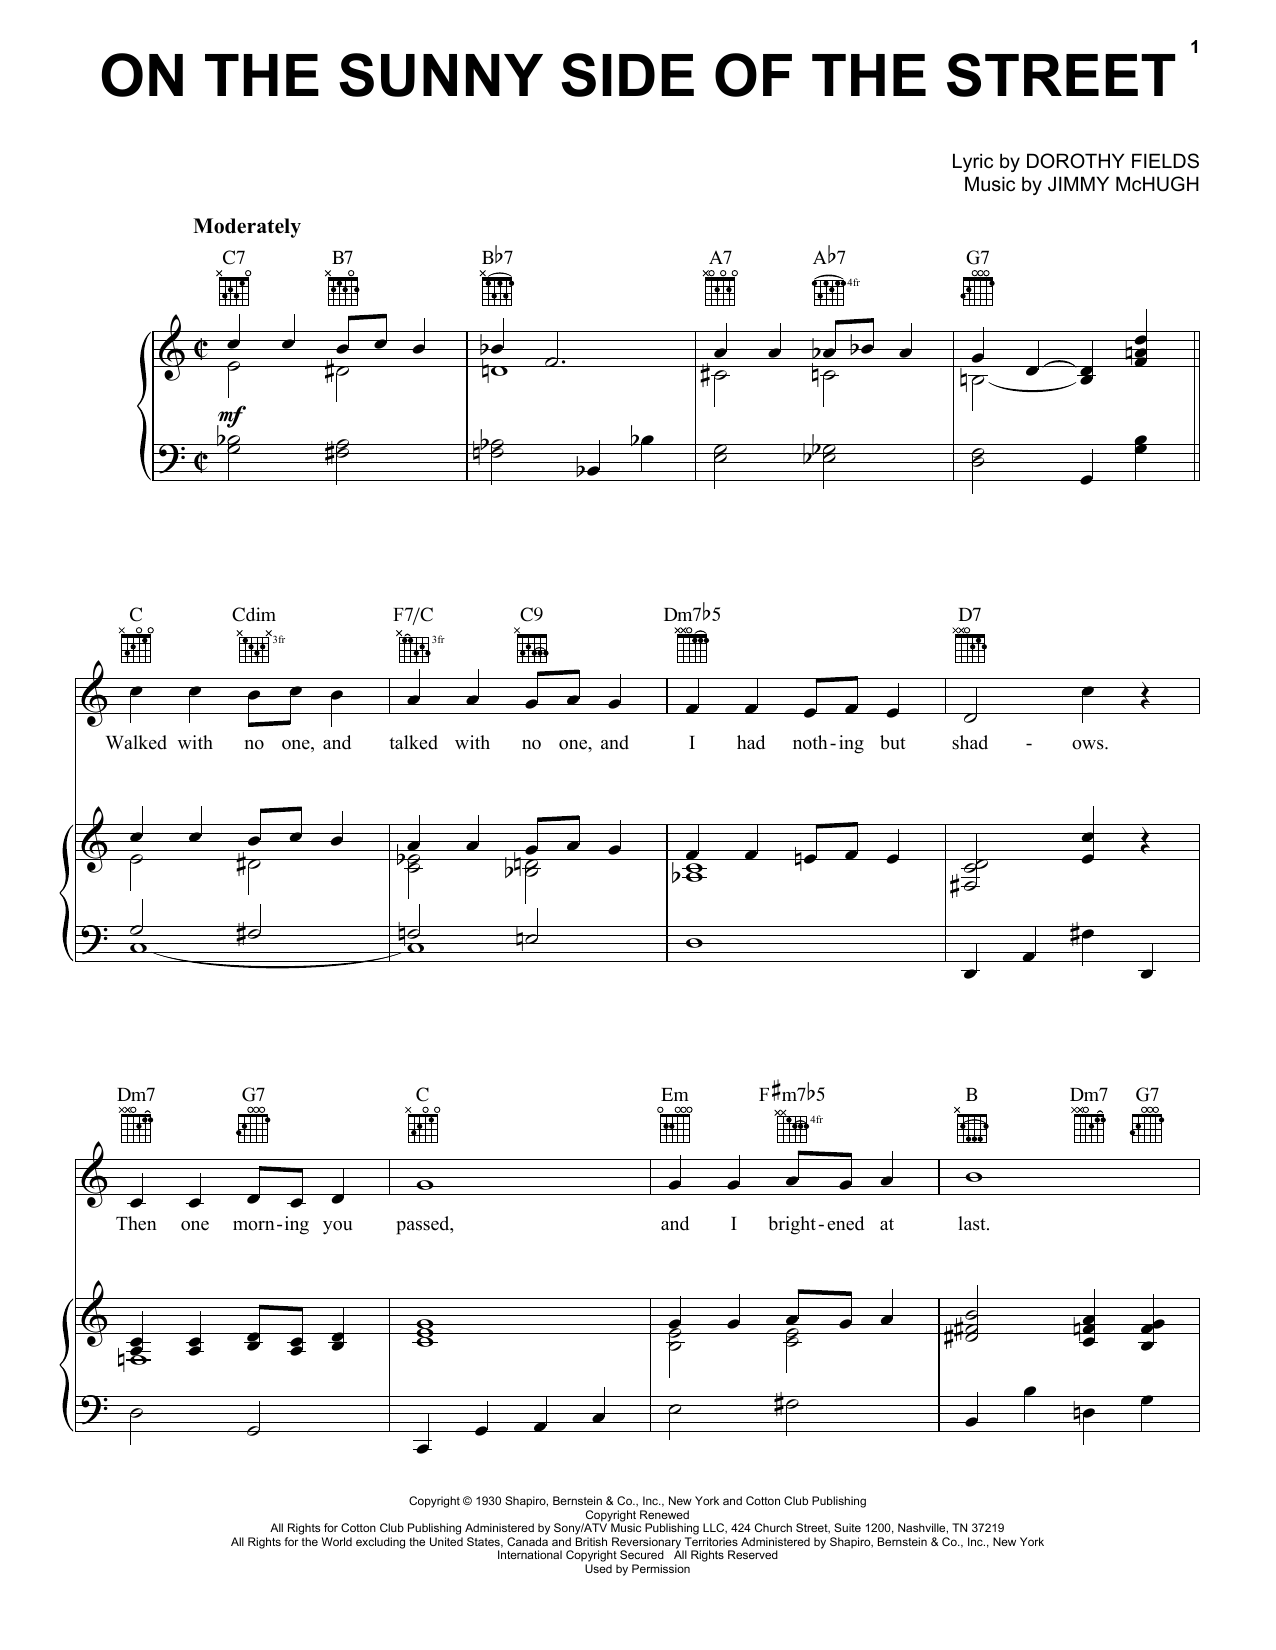 Dorothy Fields On The Sunny Side Of The Street sheet music notes and chords. Download Printable PDF.